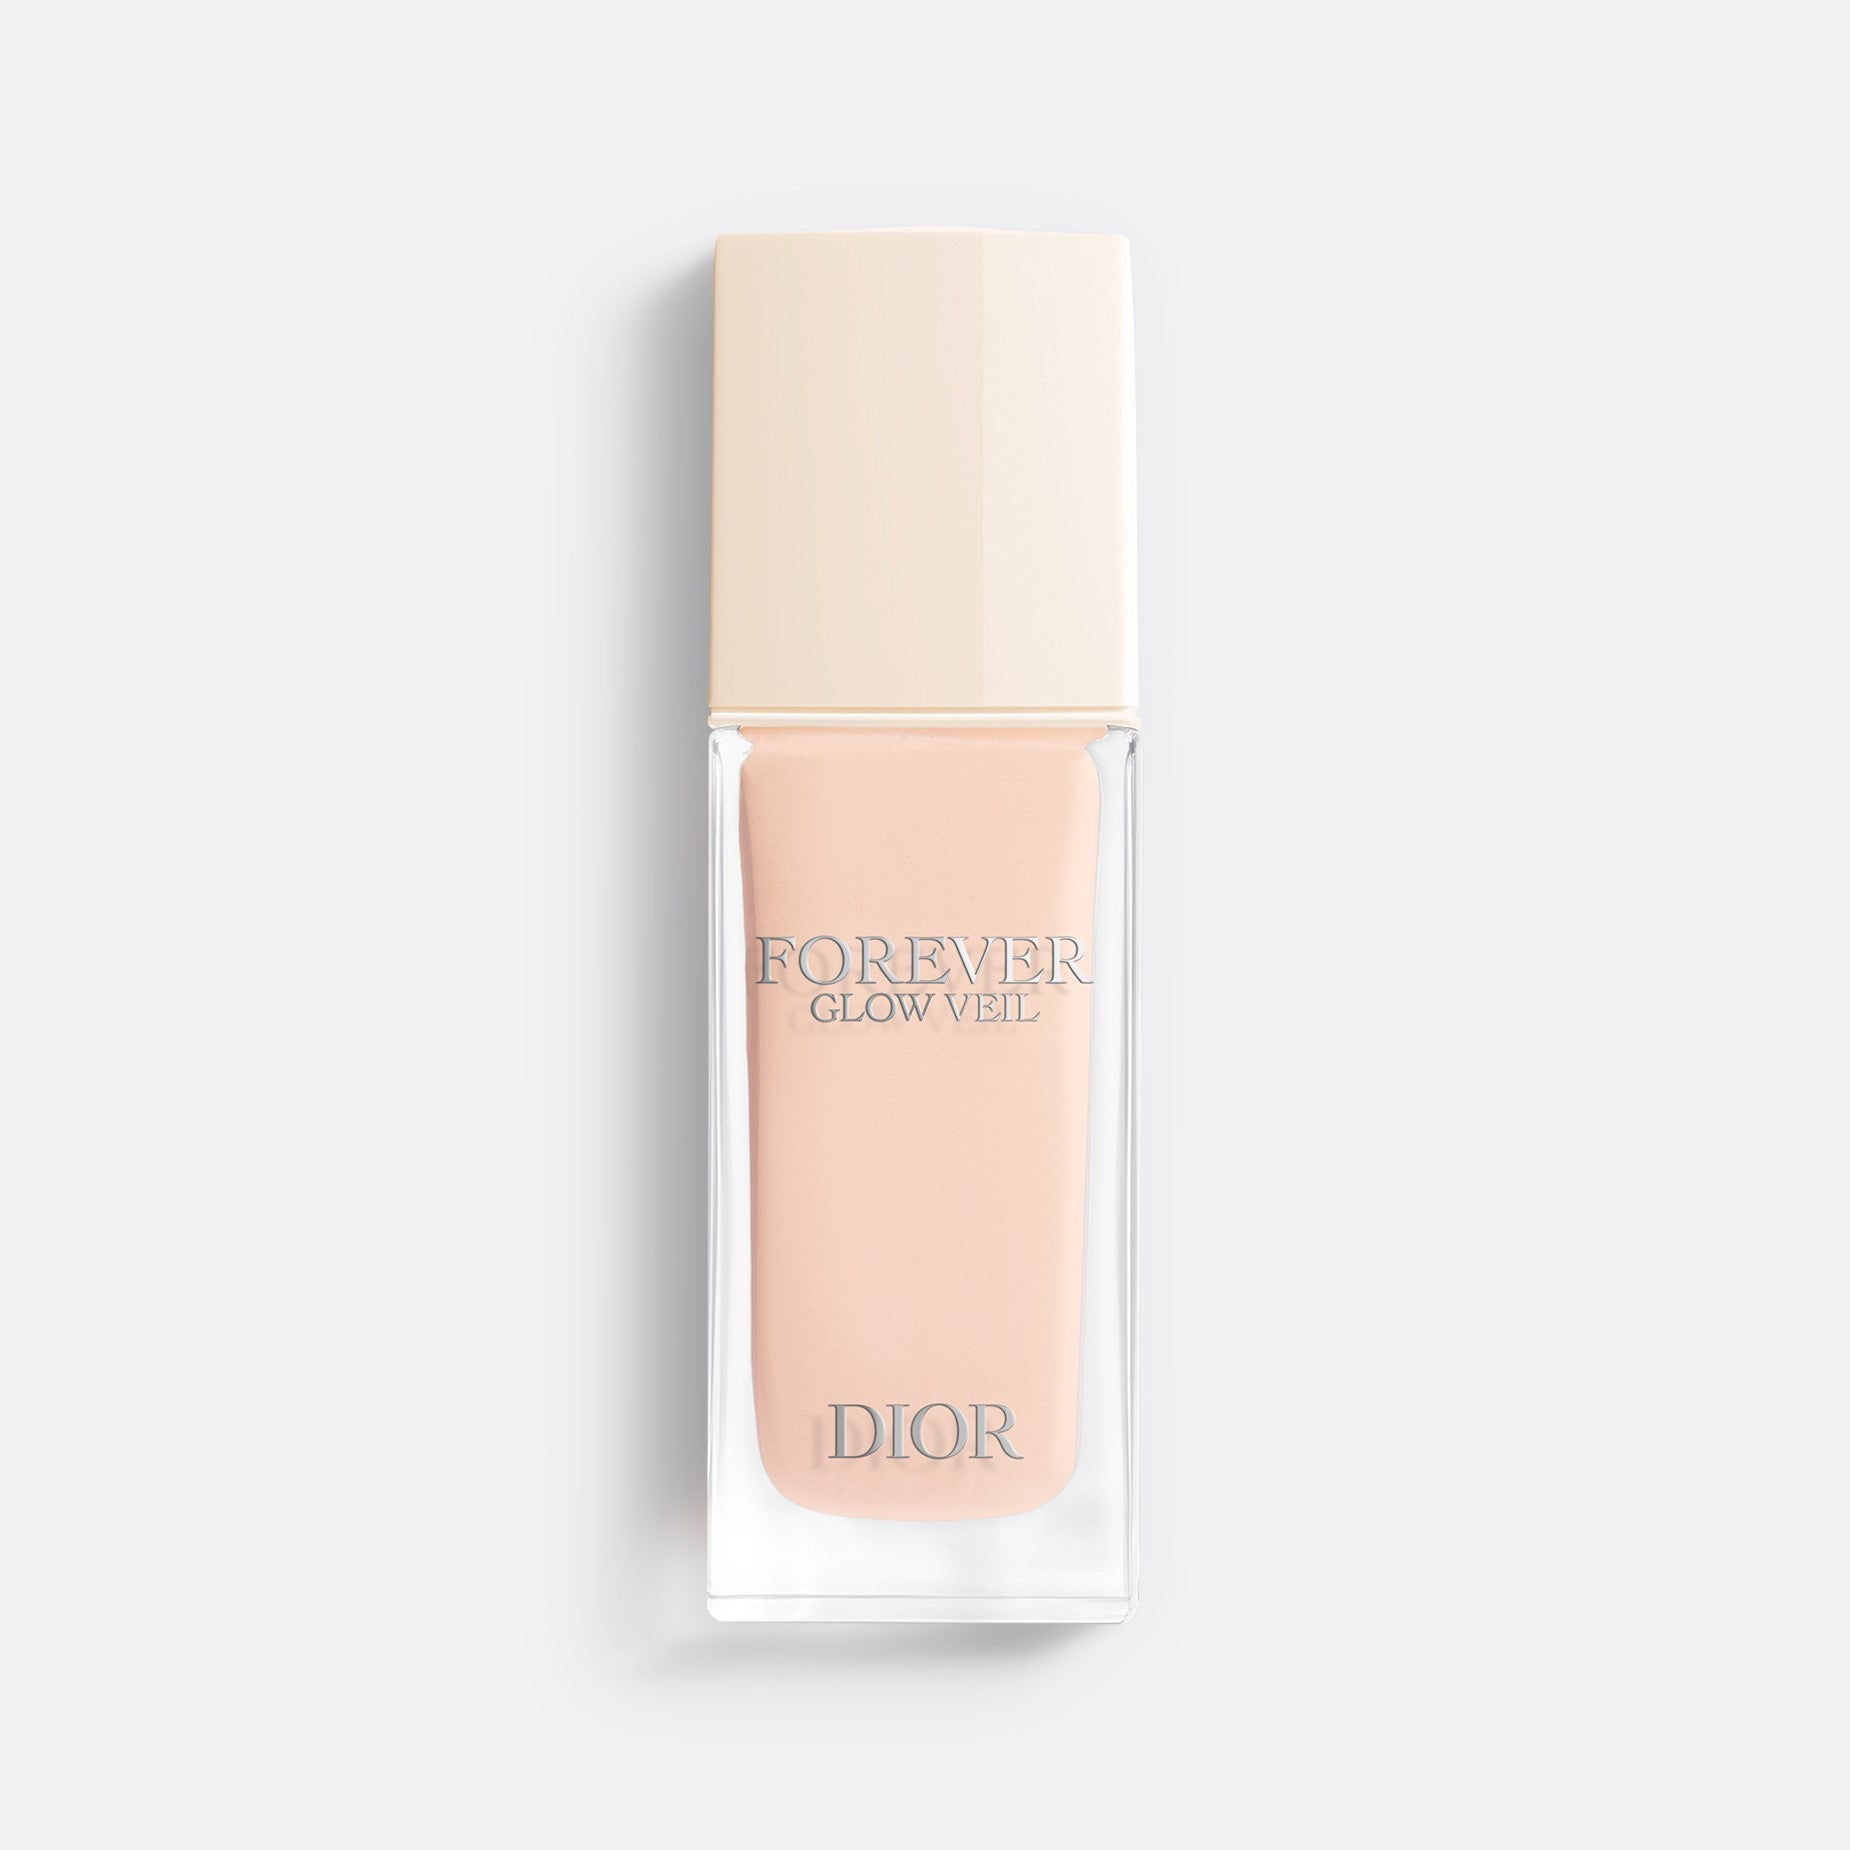 DIOR FOREVER GLOW VEIL  ~  Radiance Primer - 24h Hydration - Concentrated in Floral Skincare and Hyaluronic Acid